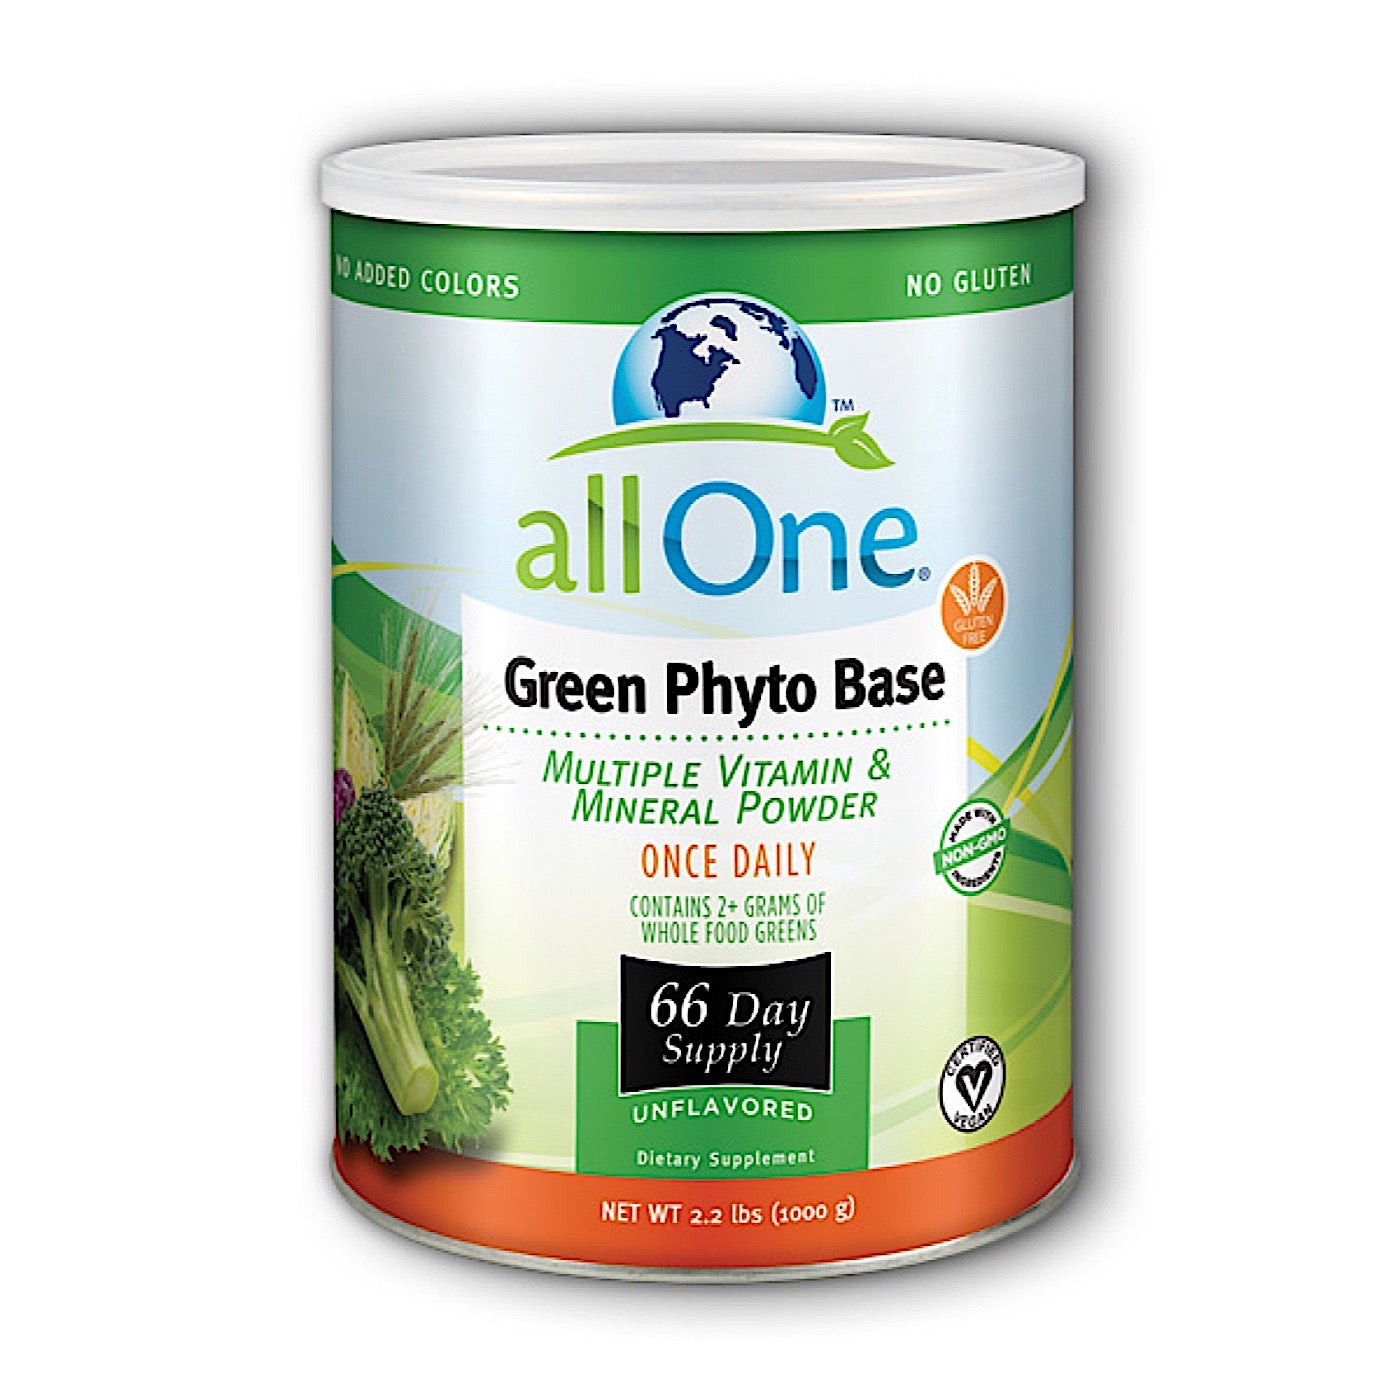 All One Green Phyto-Base Powder 66 Day Supply 2.2 Lbs